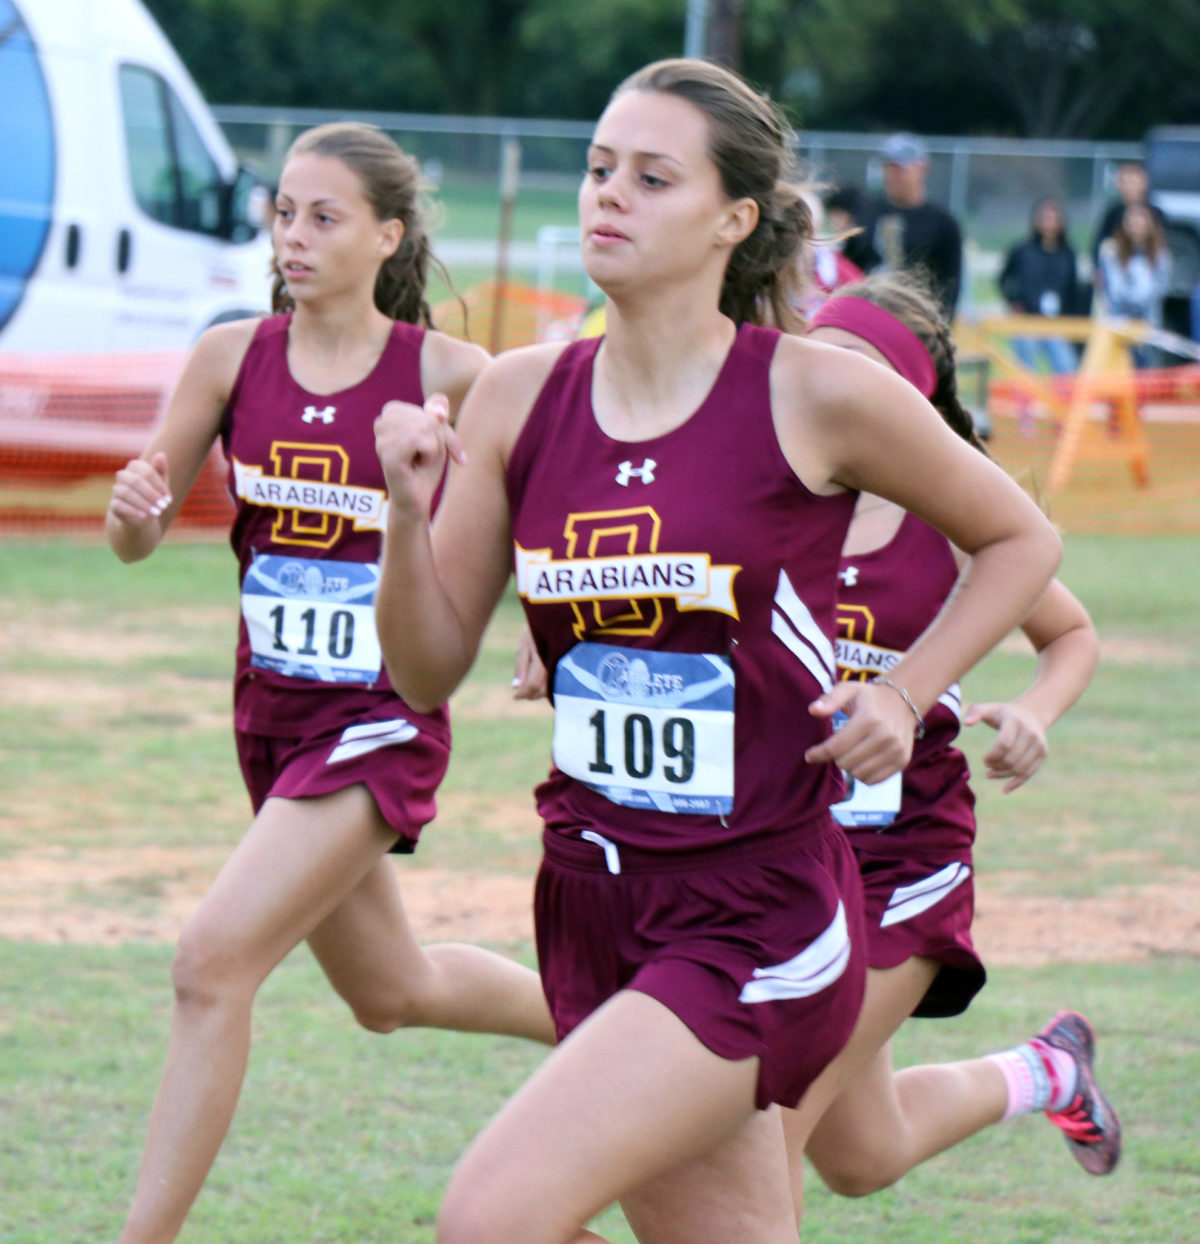 Arabians take 2nd in District XC, advance to Regionals